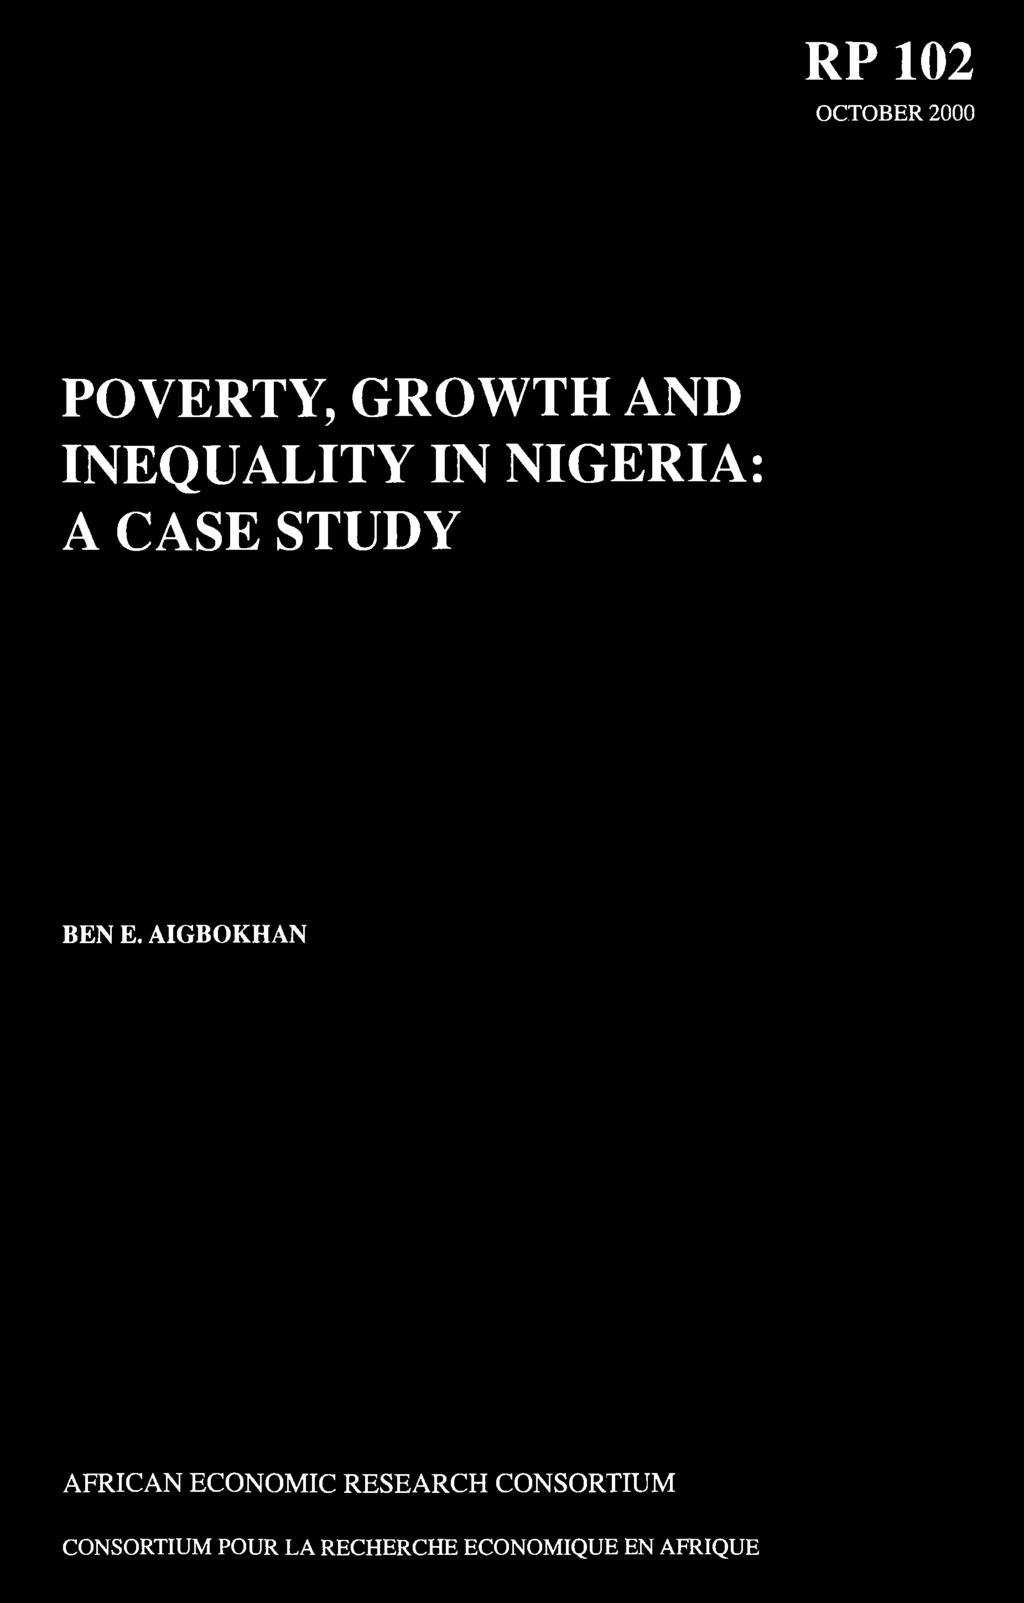 AIGBOKHAN AFRICAN ECONOMIC RESEARCH